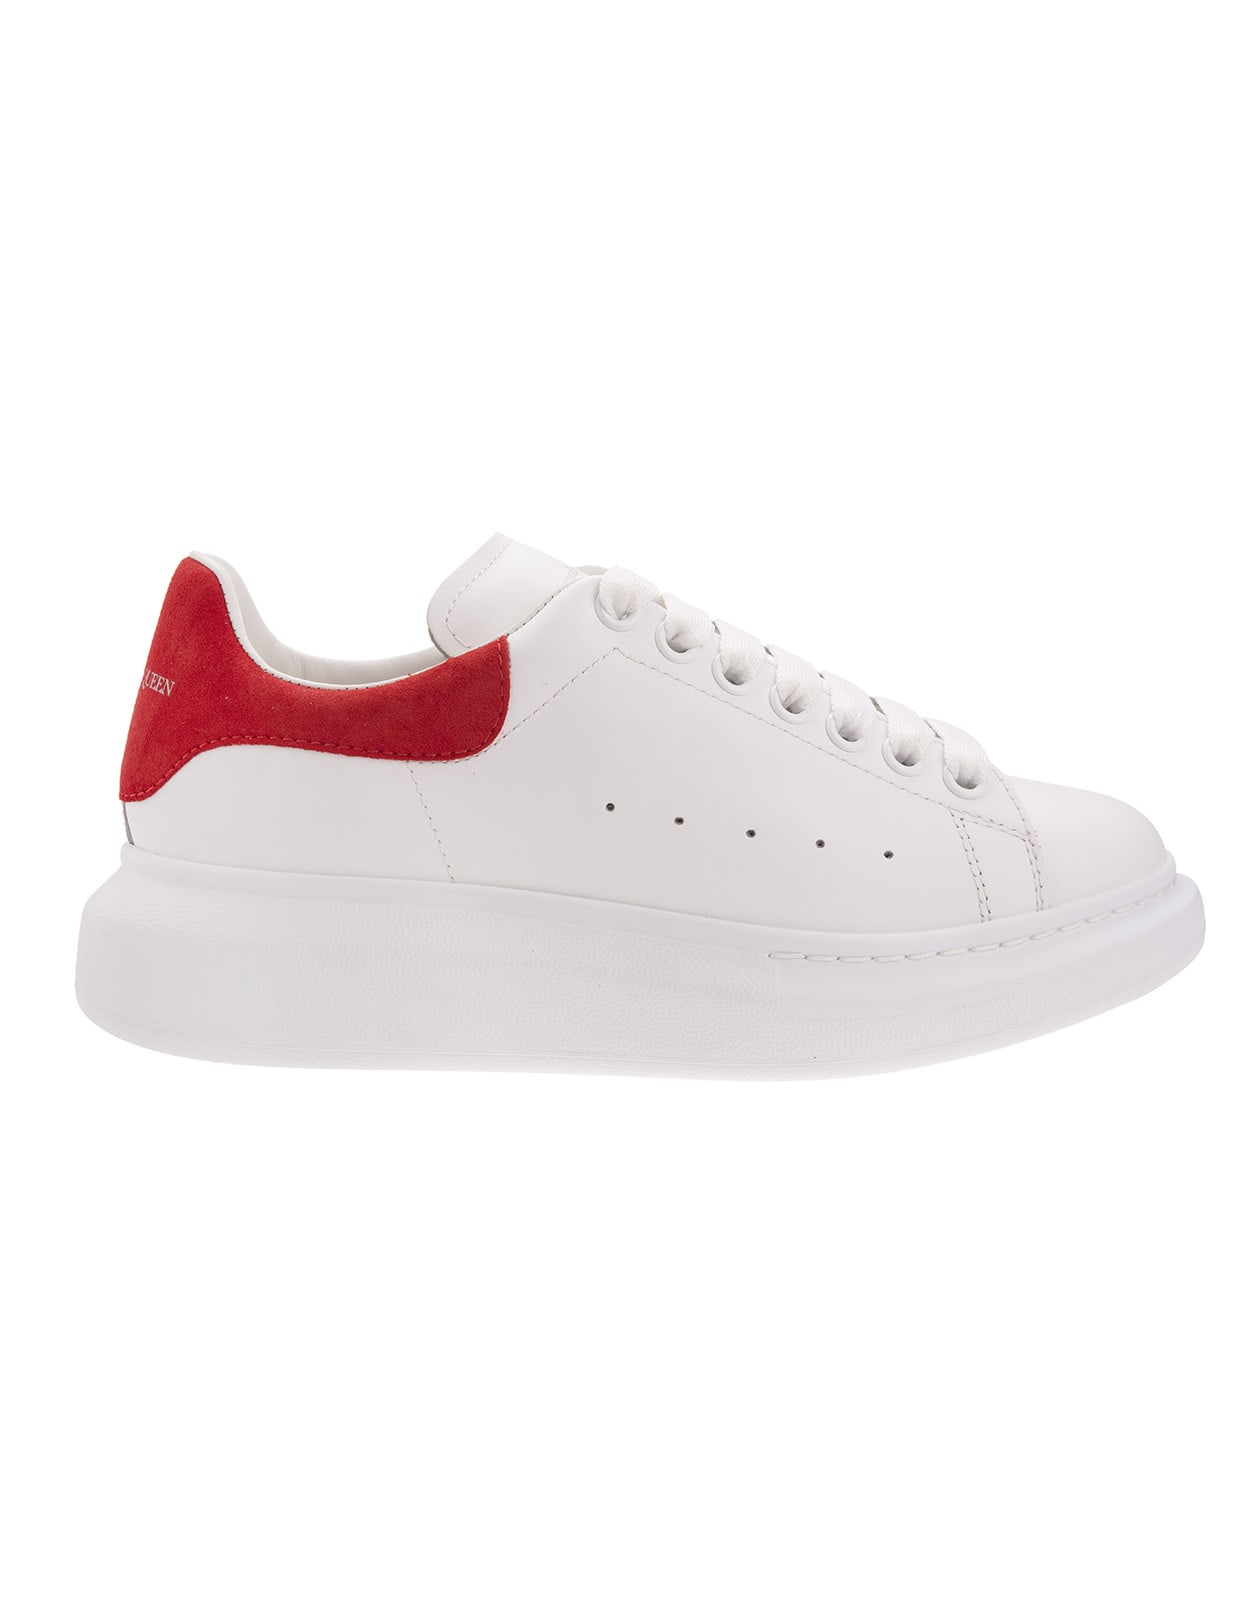 Buy Alexander McQueen White And Red Woman Oversized Sneakers online, shop Alexander McQueen shoes with free shipping